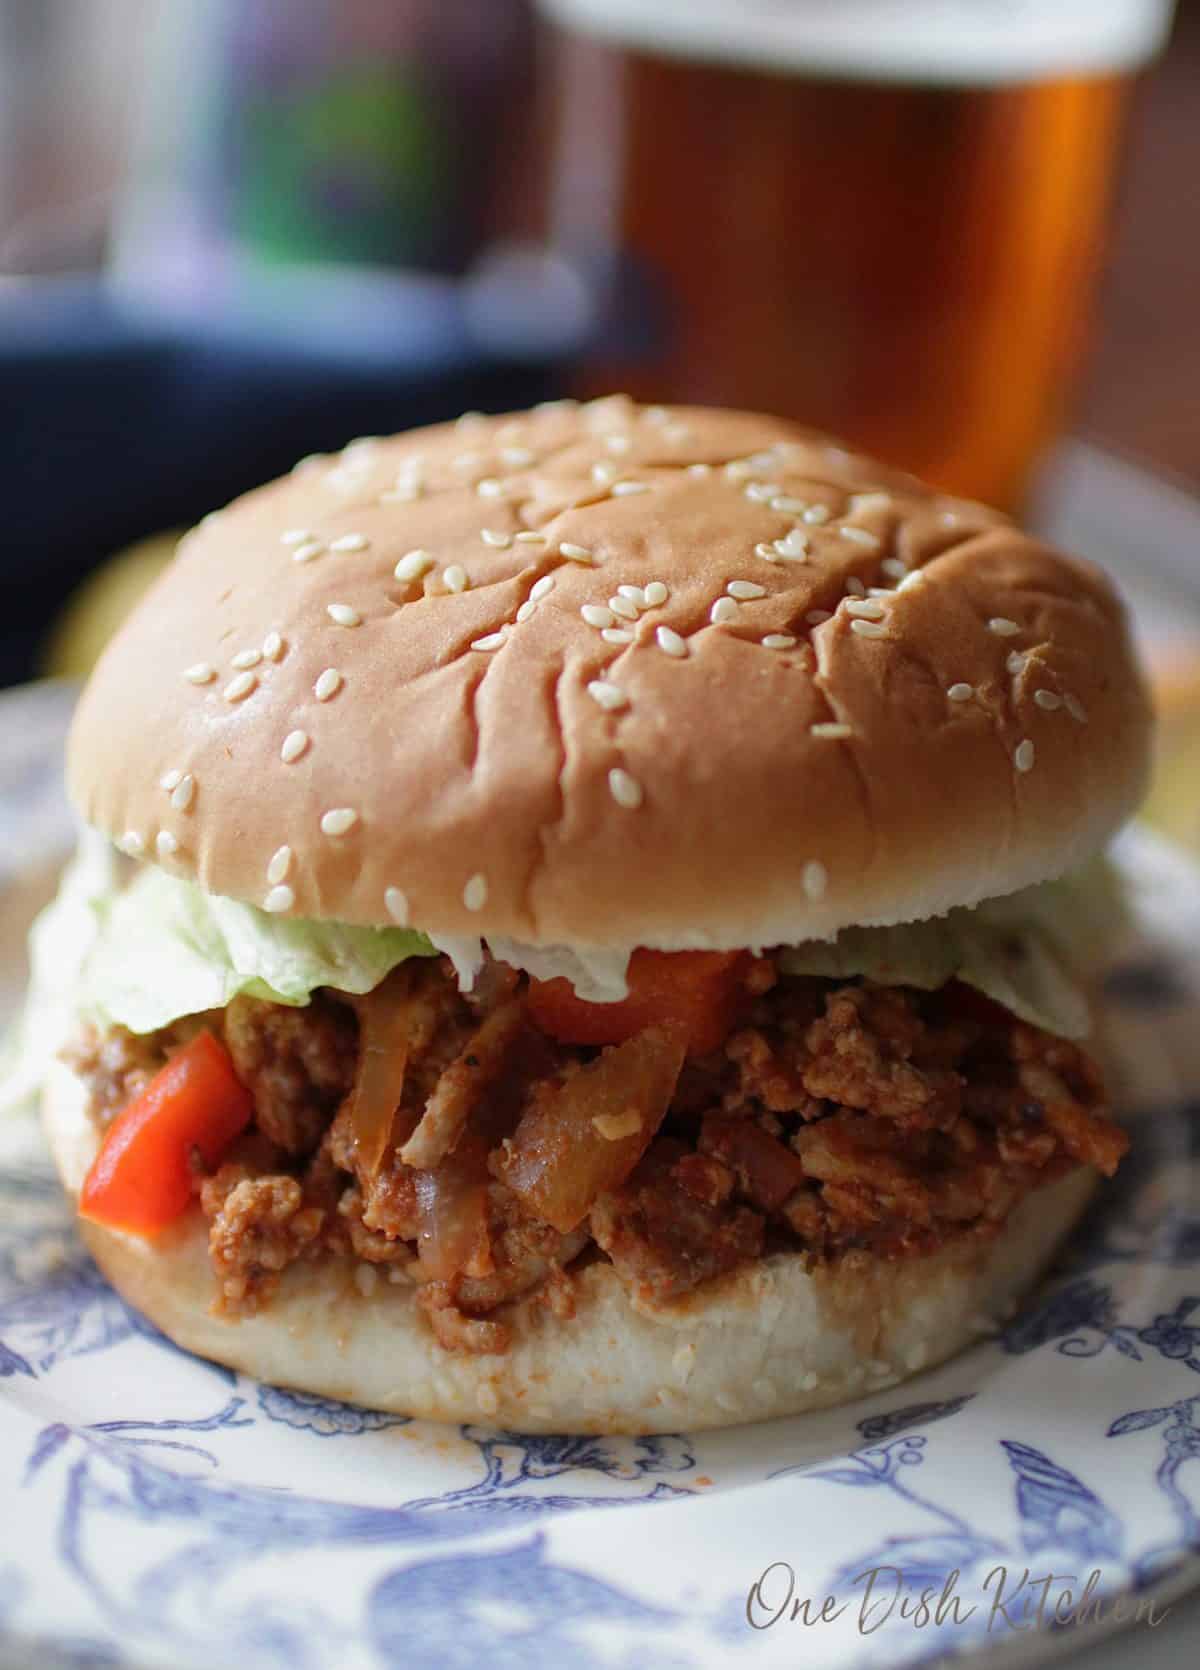 A sloppy joe with lettuce and tomato between a hamburger bun with sesame seeds on a plate